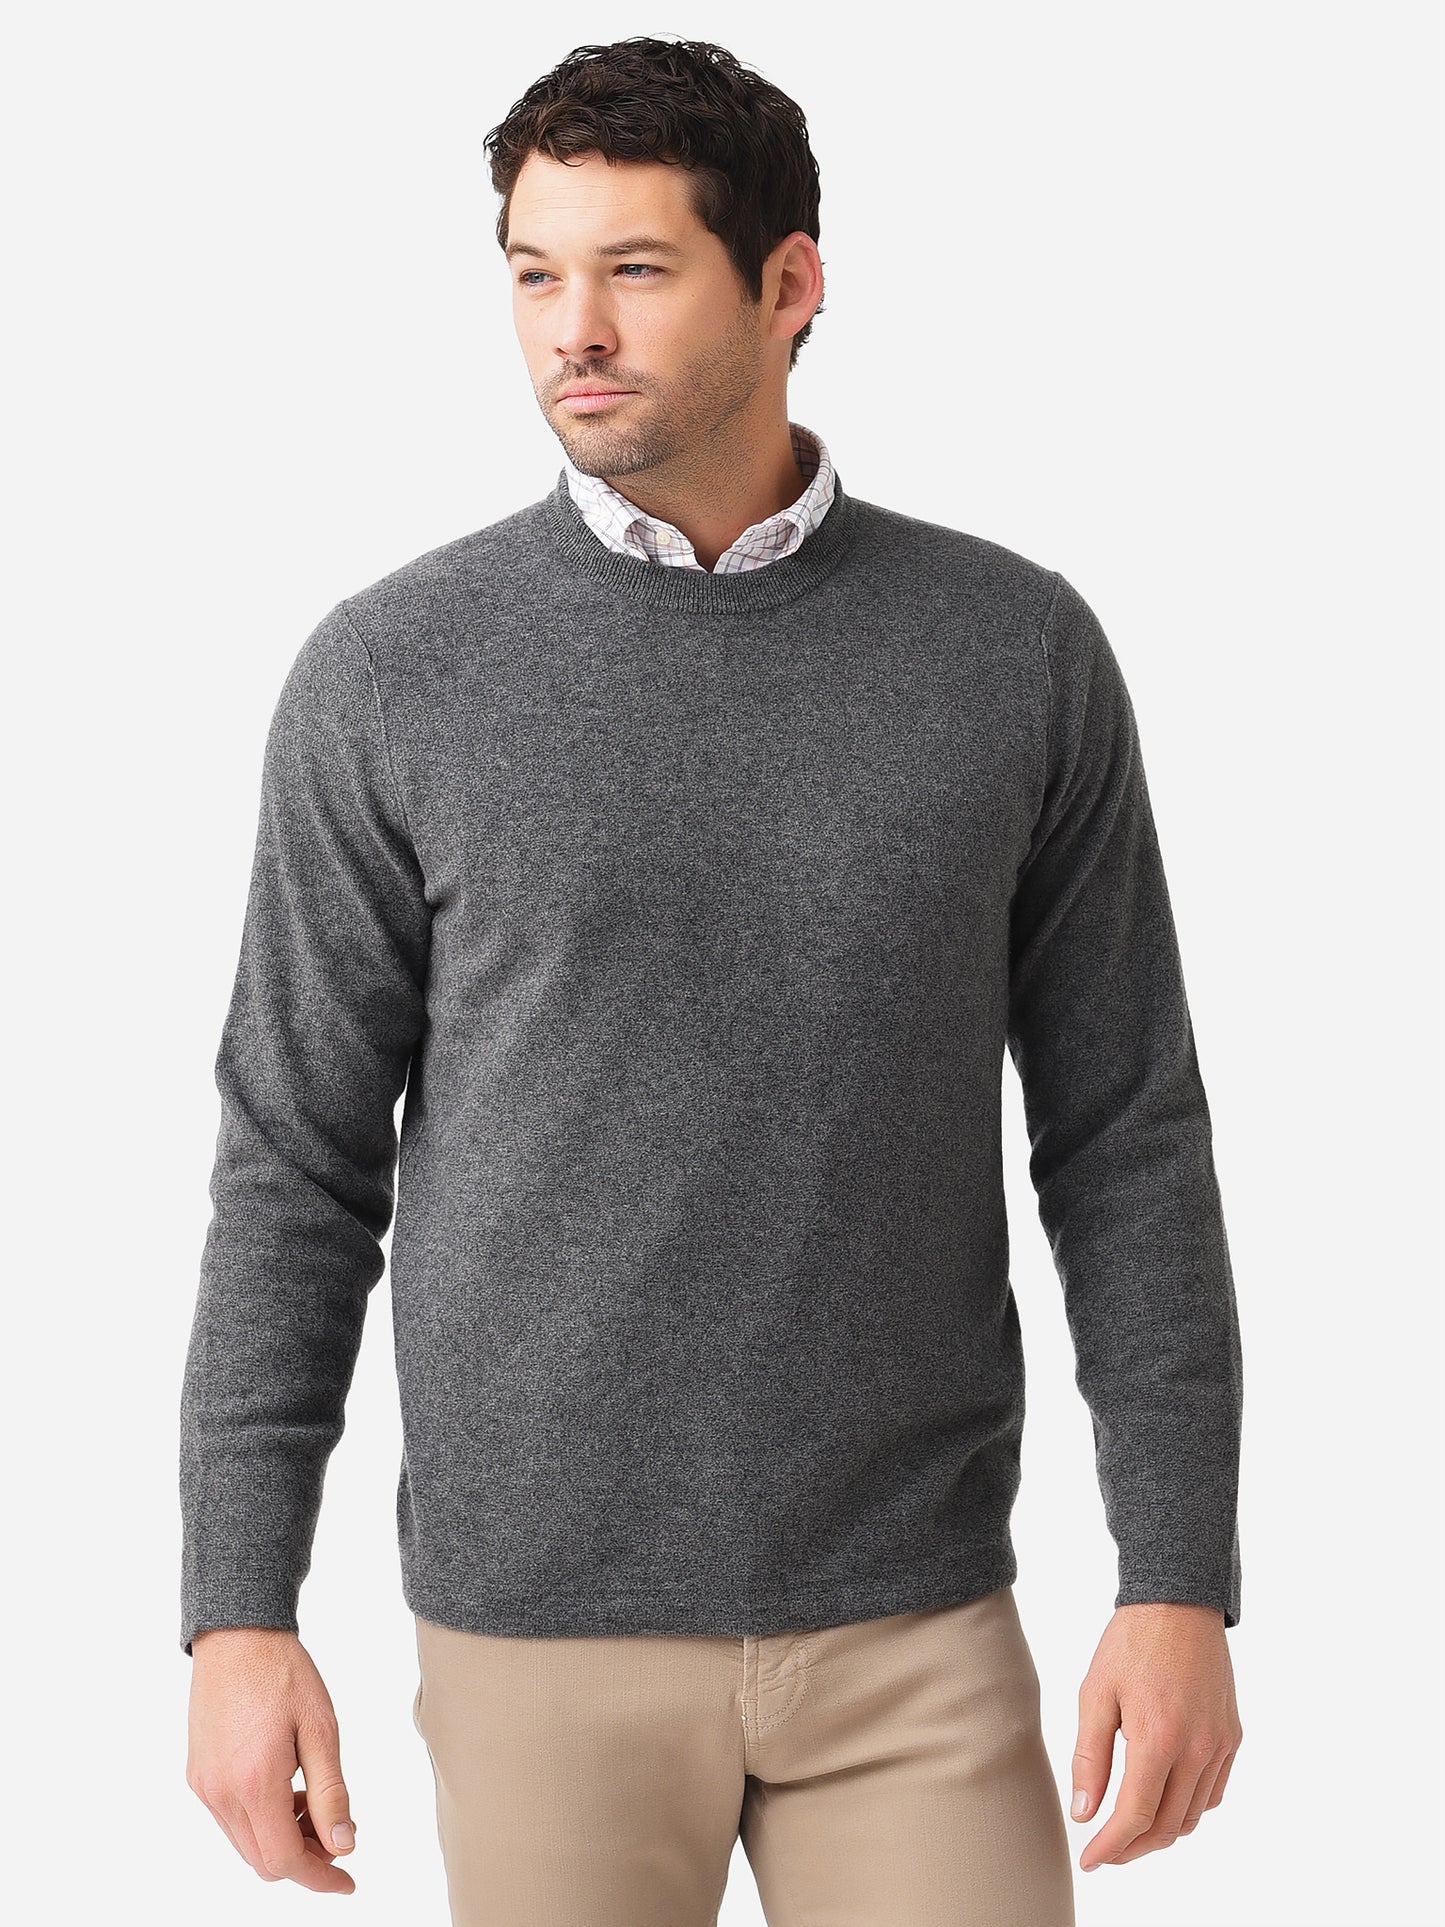 Vince Men's Boiled Cashmere Long Sleeve Crew Sweater